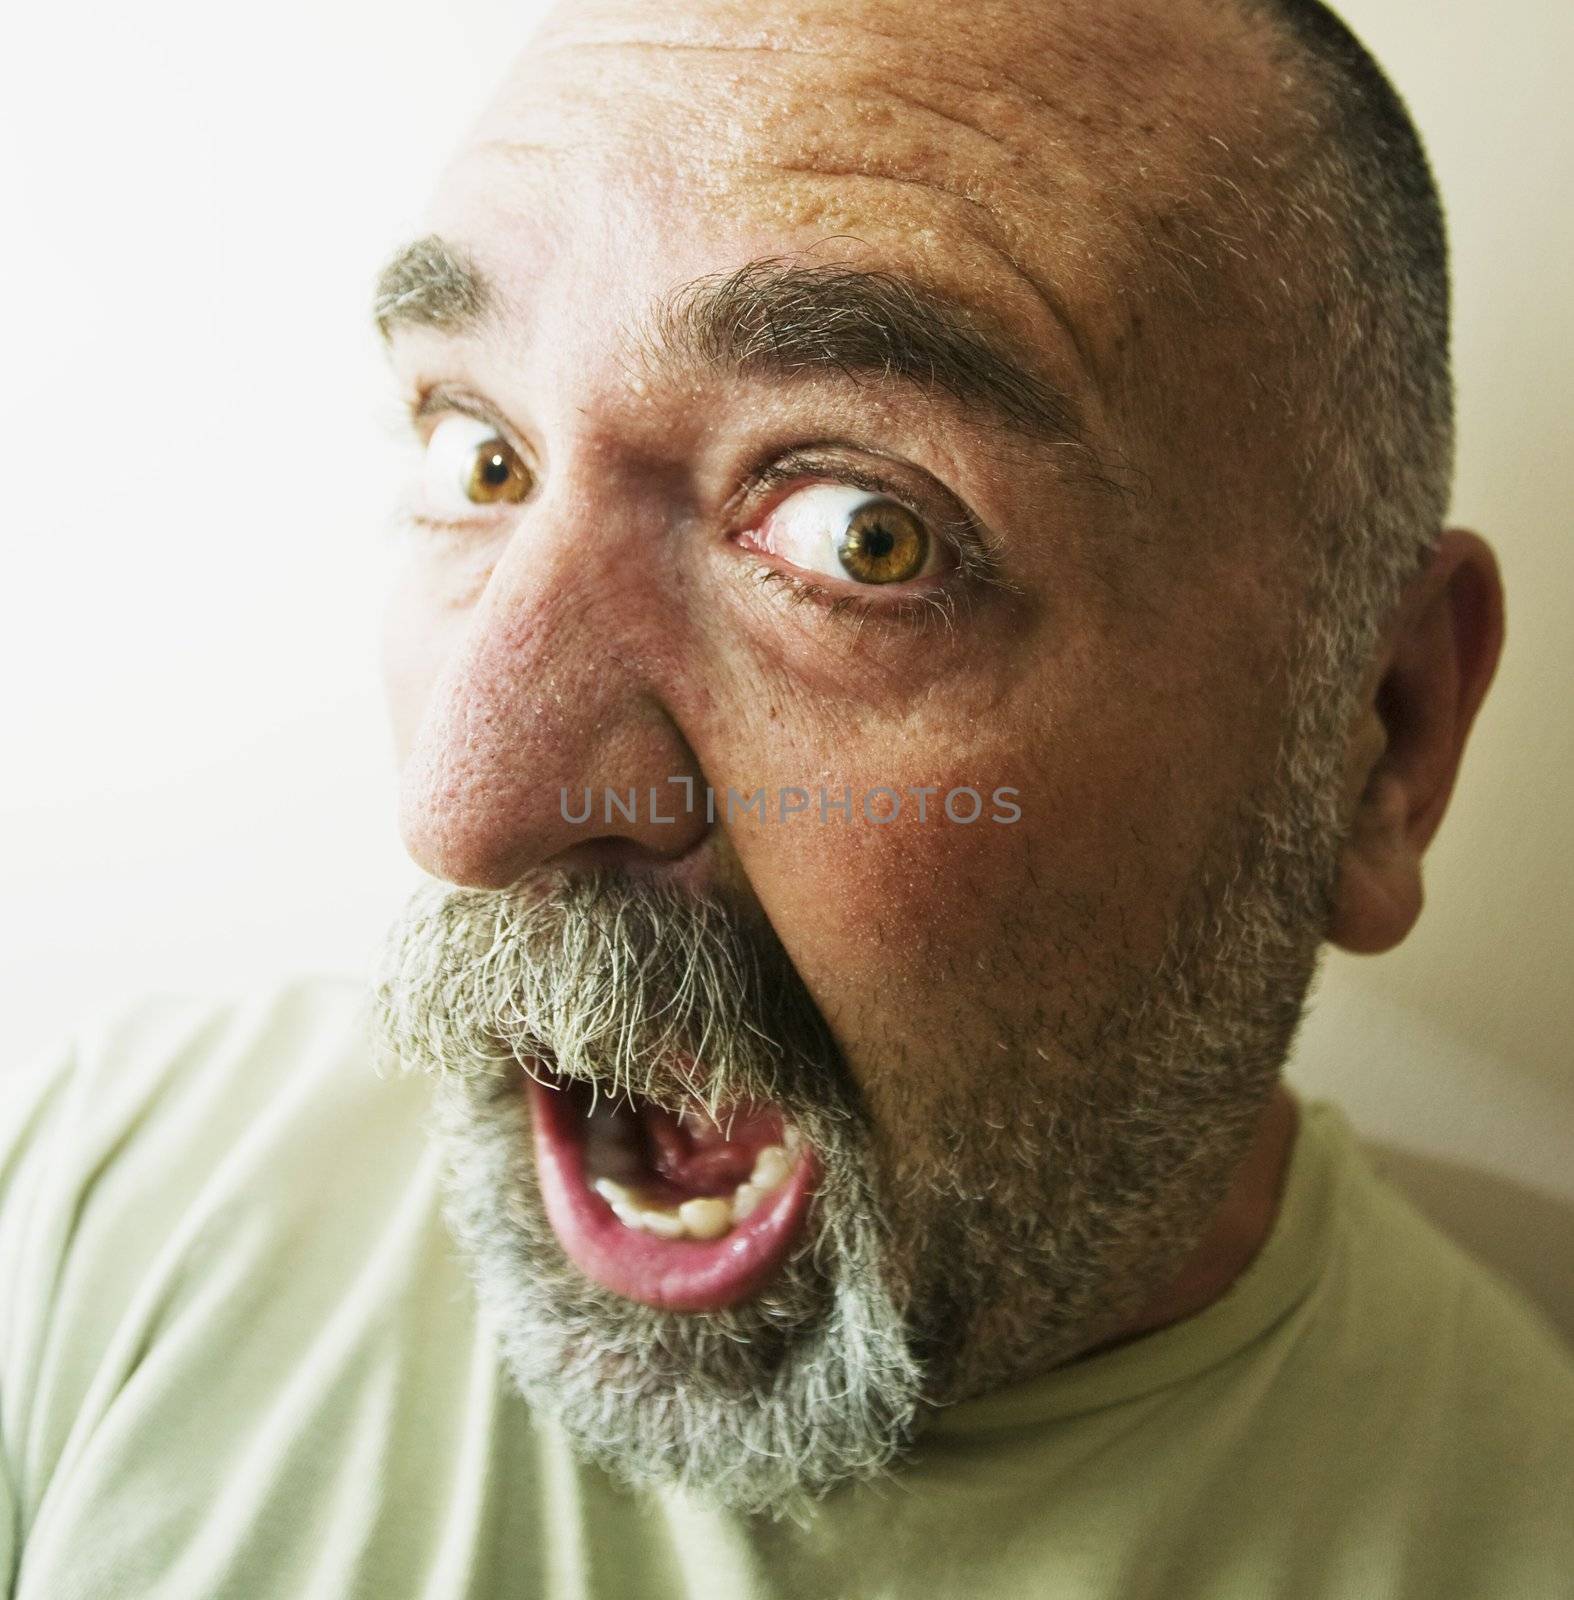 Protrait of an screaming bald man with a beard.